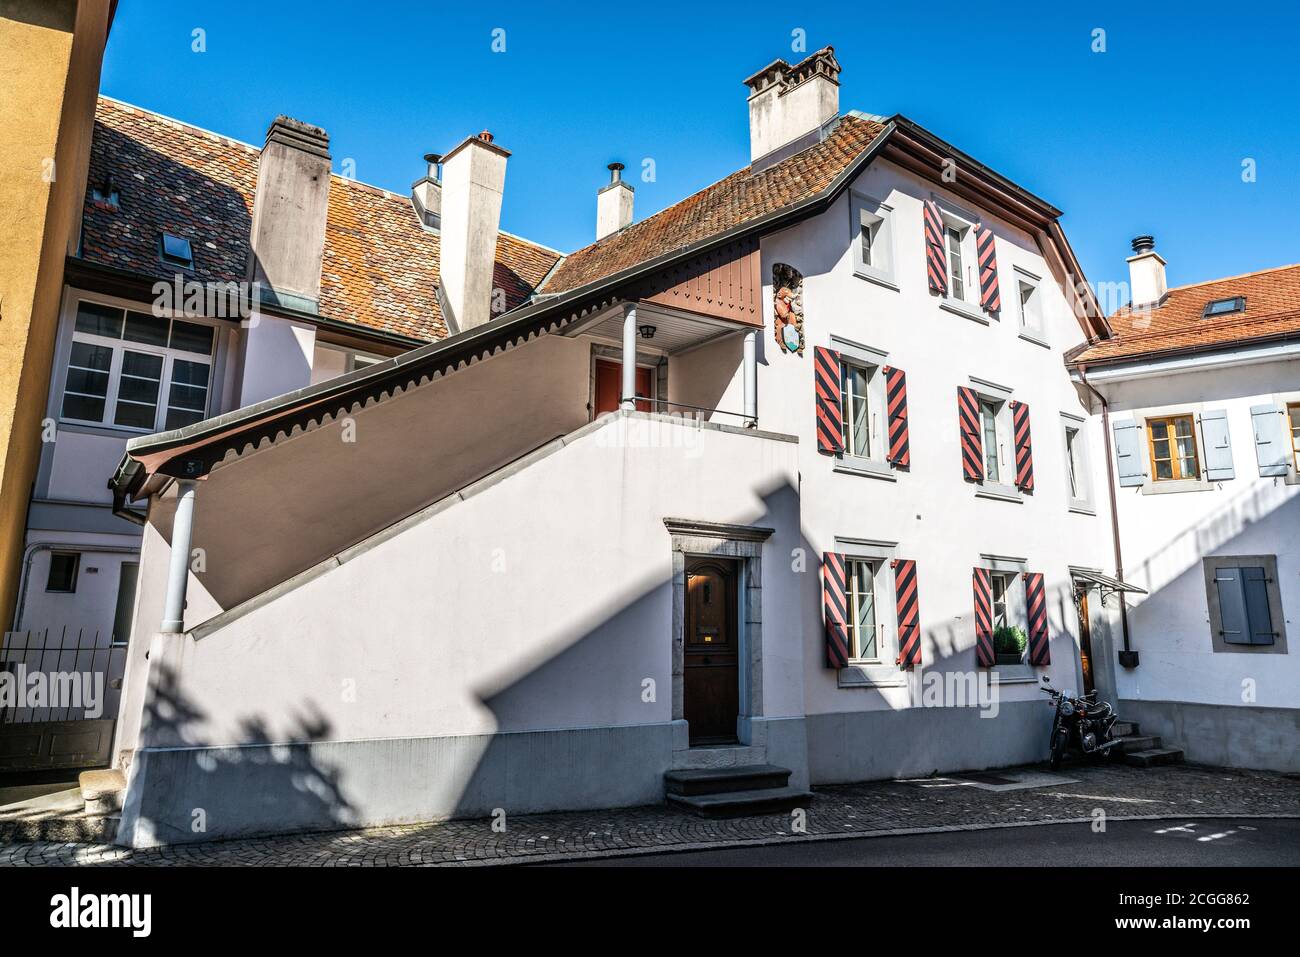 Montreux Switzerland , 5 July 2020 : Maison de l’ours or Bear house an historic building in Montreux old town Switzerland Stock Photo